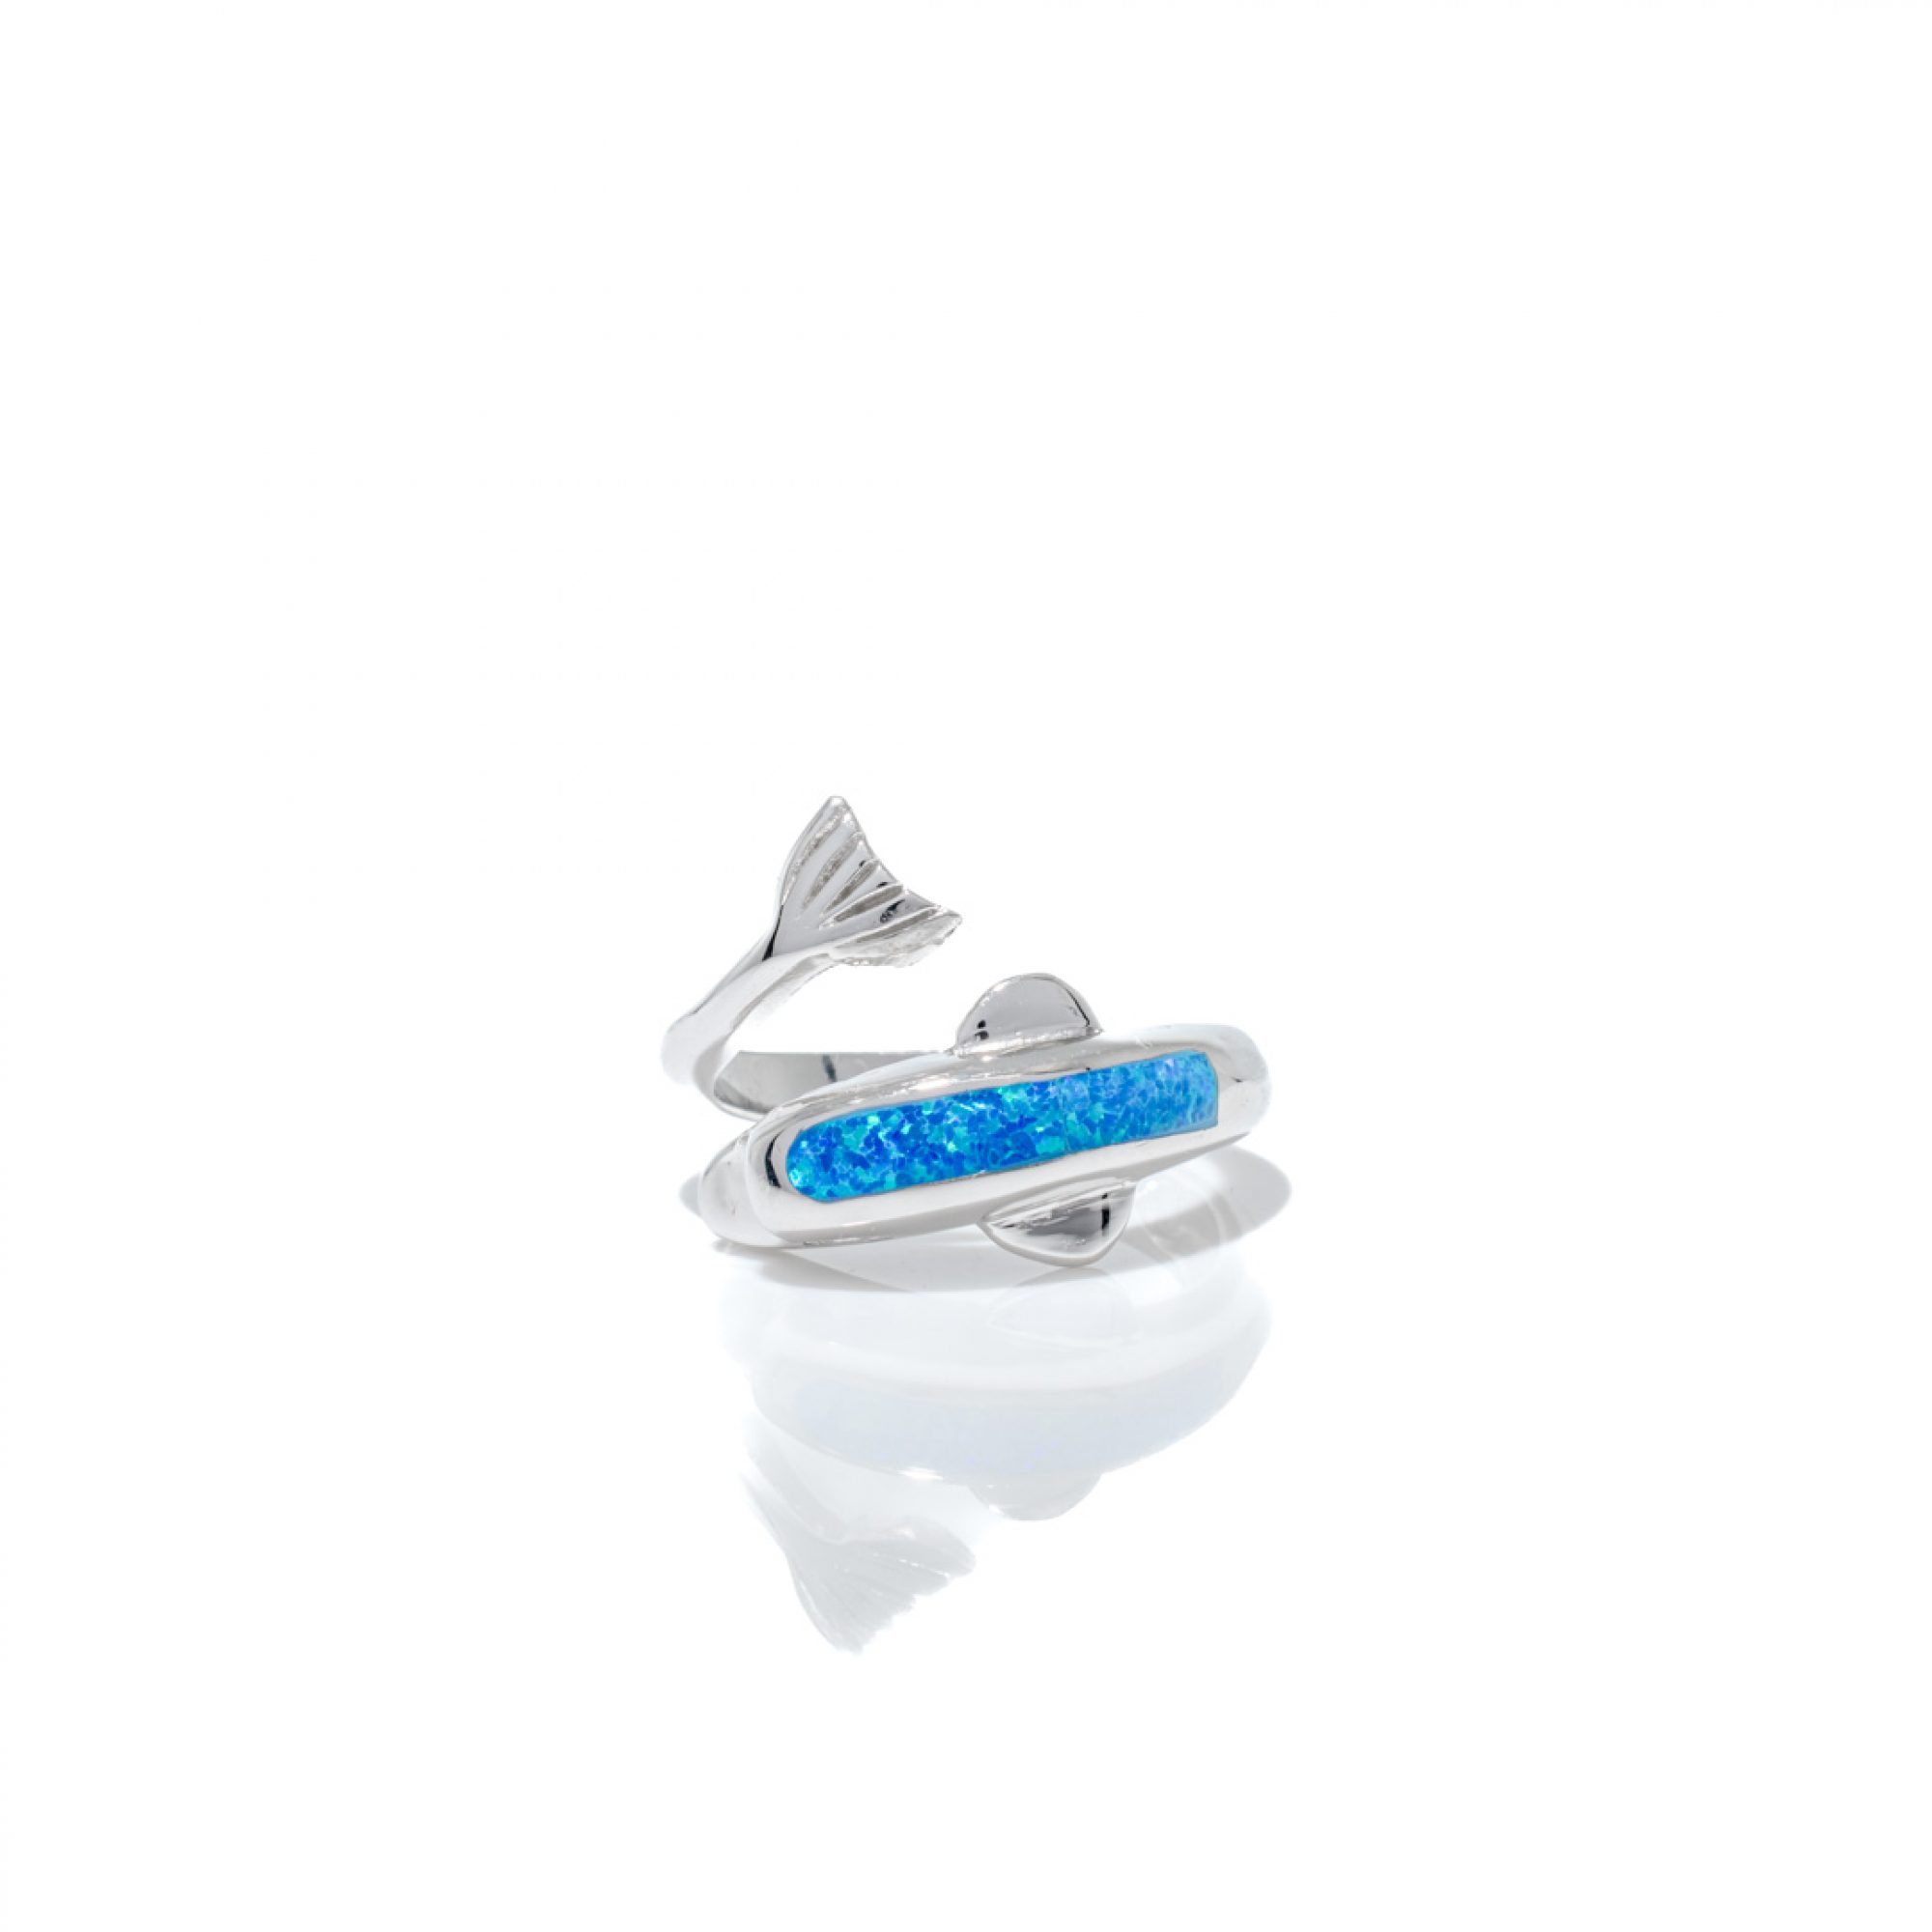 Silver dolphin ring with opal stone